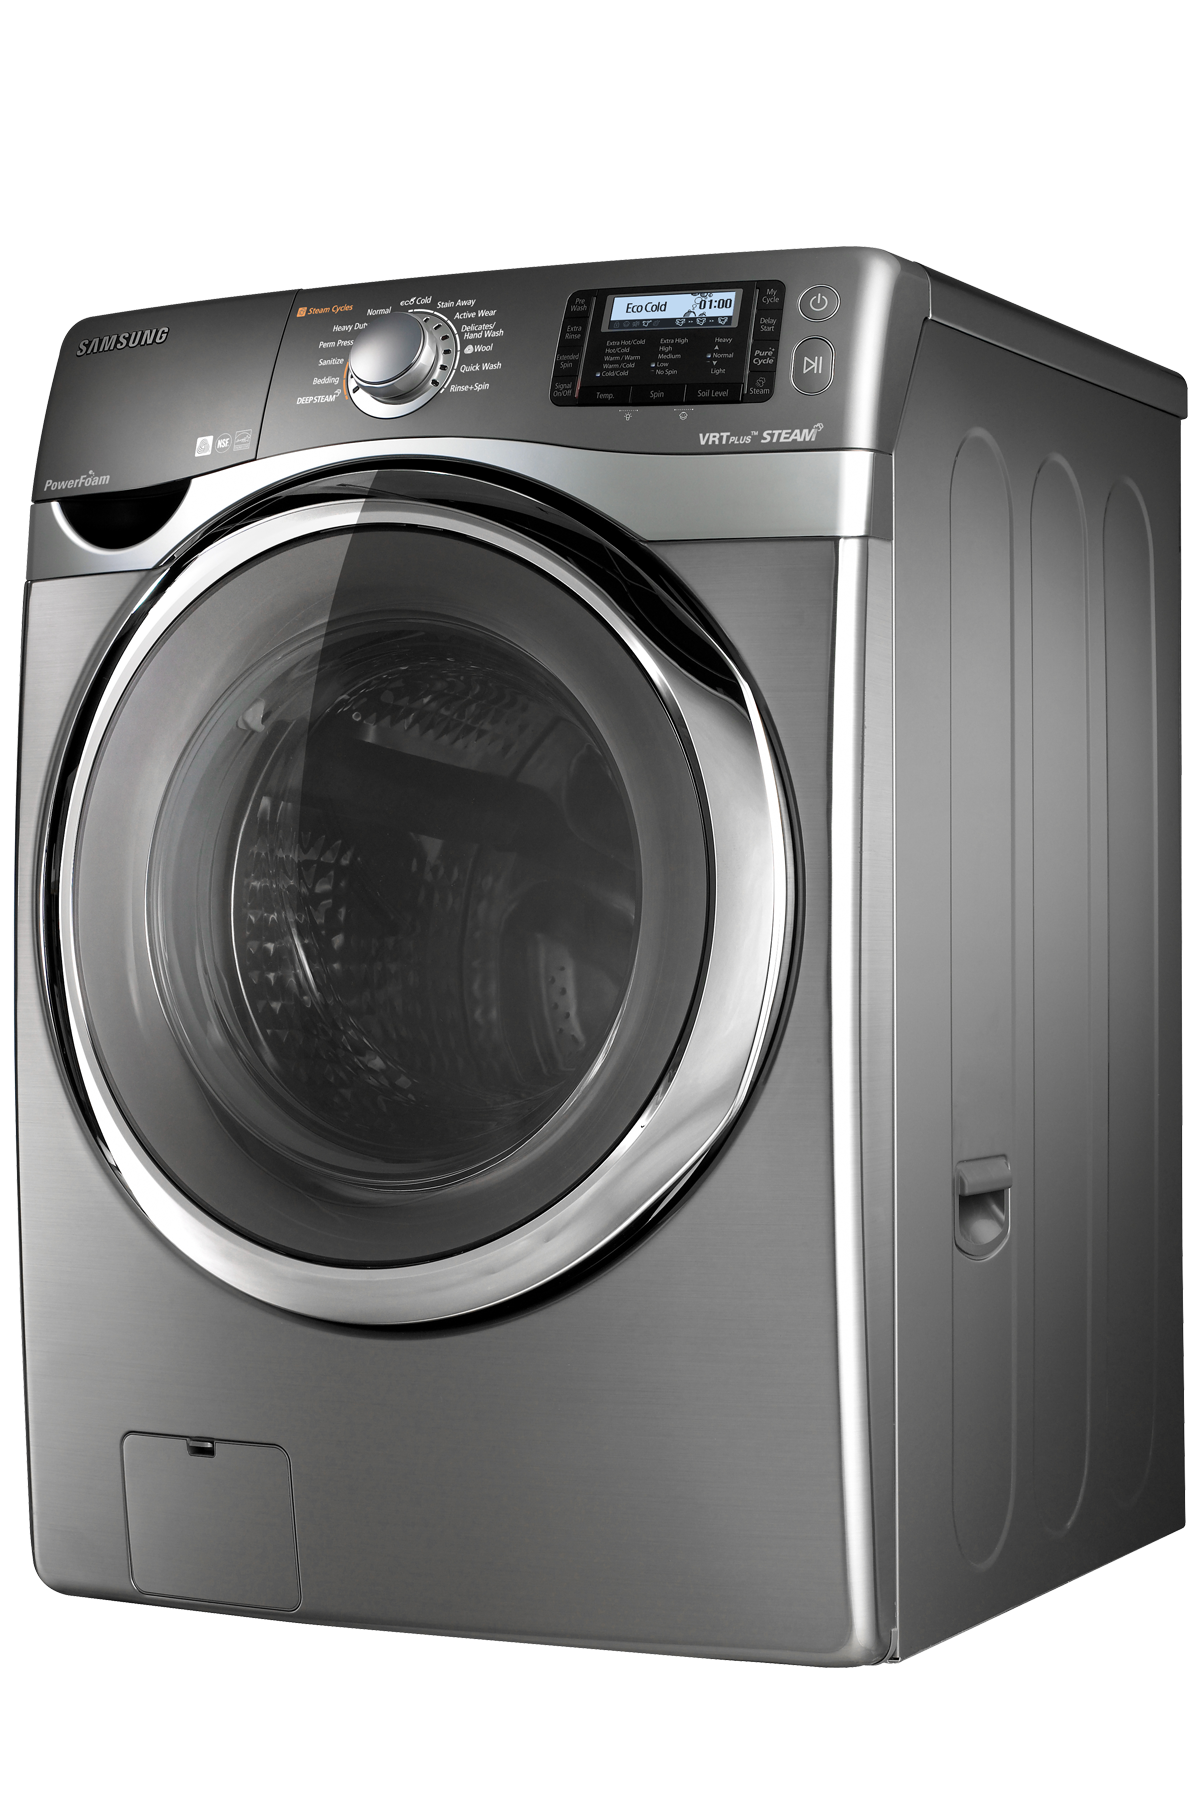 powerfoam-front-load-washer-wf520abp-samsung-canada